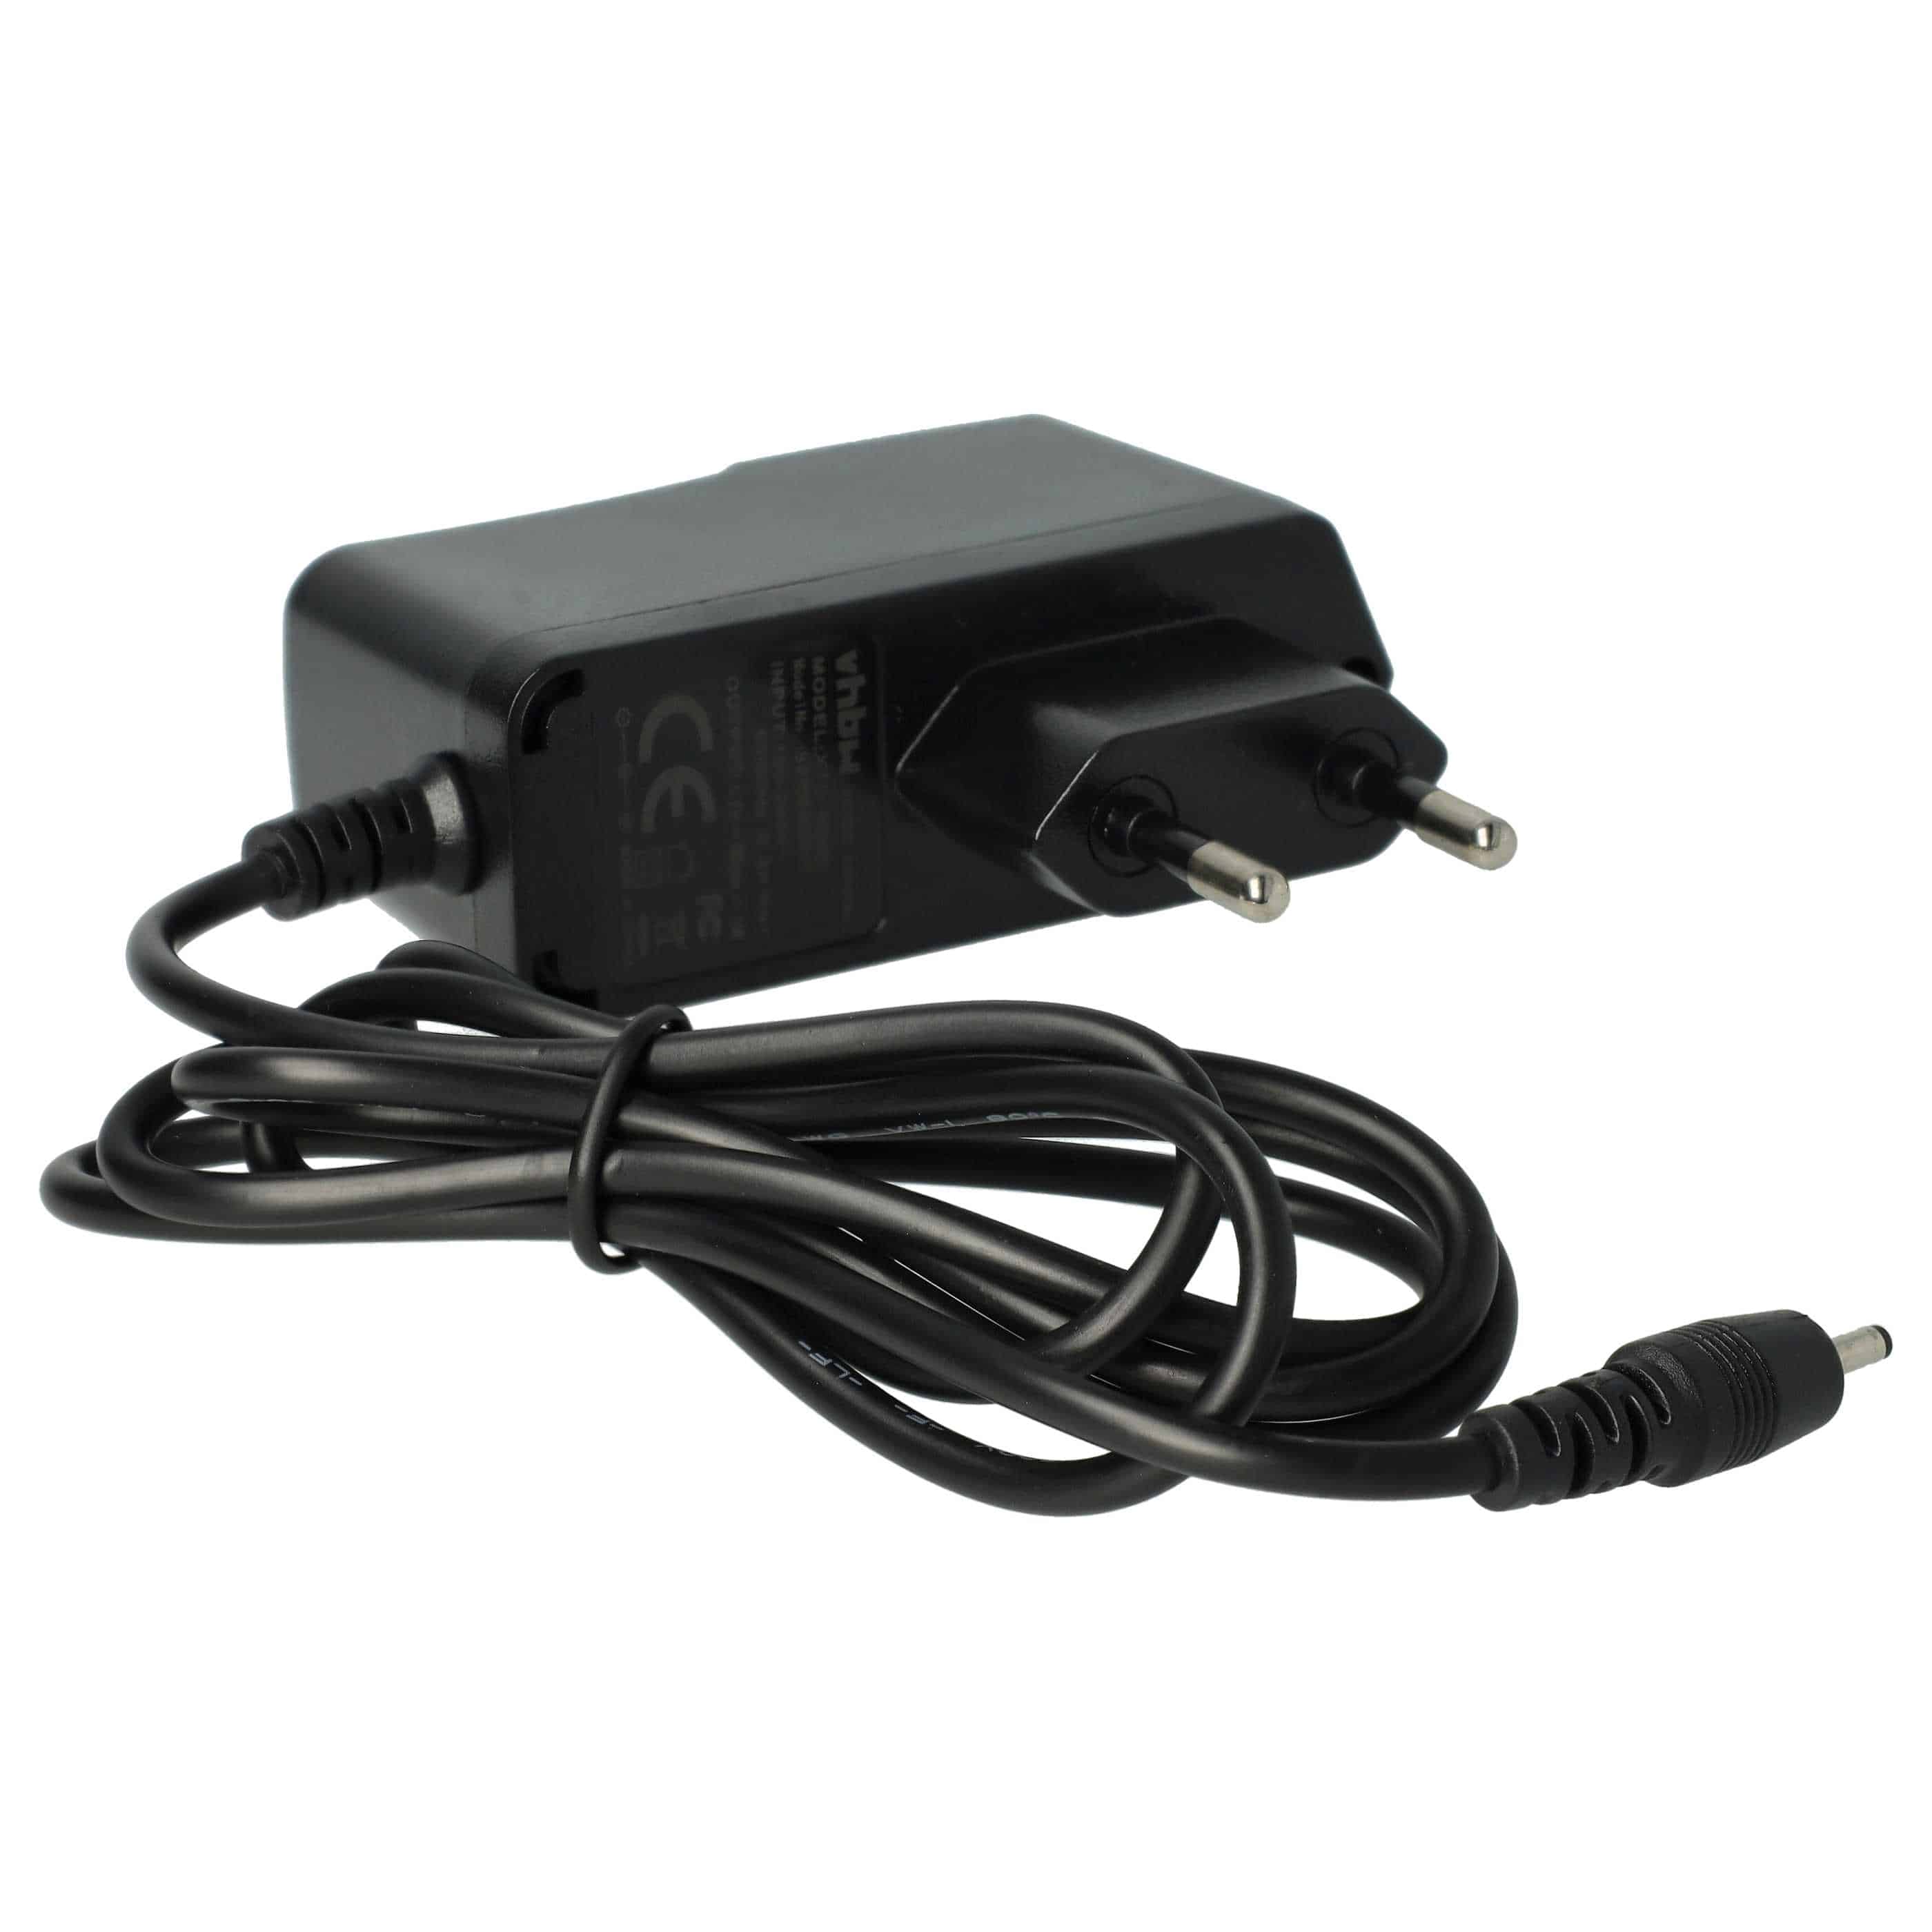 Mains Power Adapter replaces Gibson GBP-042030 for Gibson E-Guitar Tuning Device